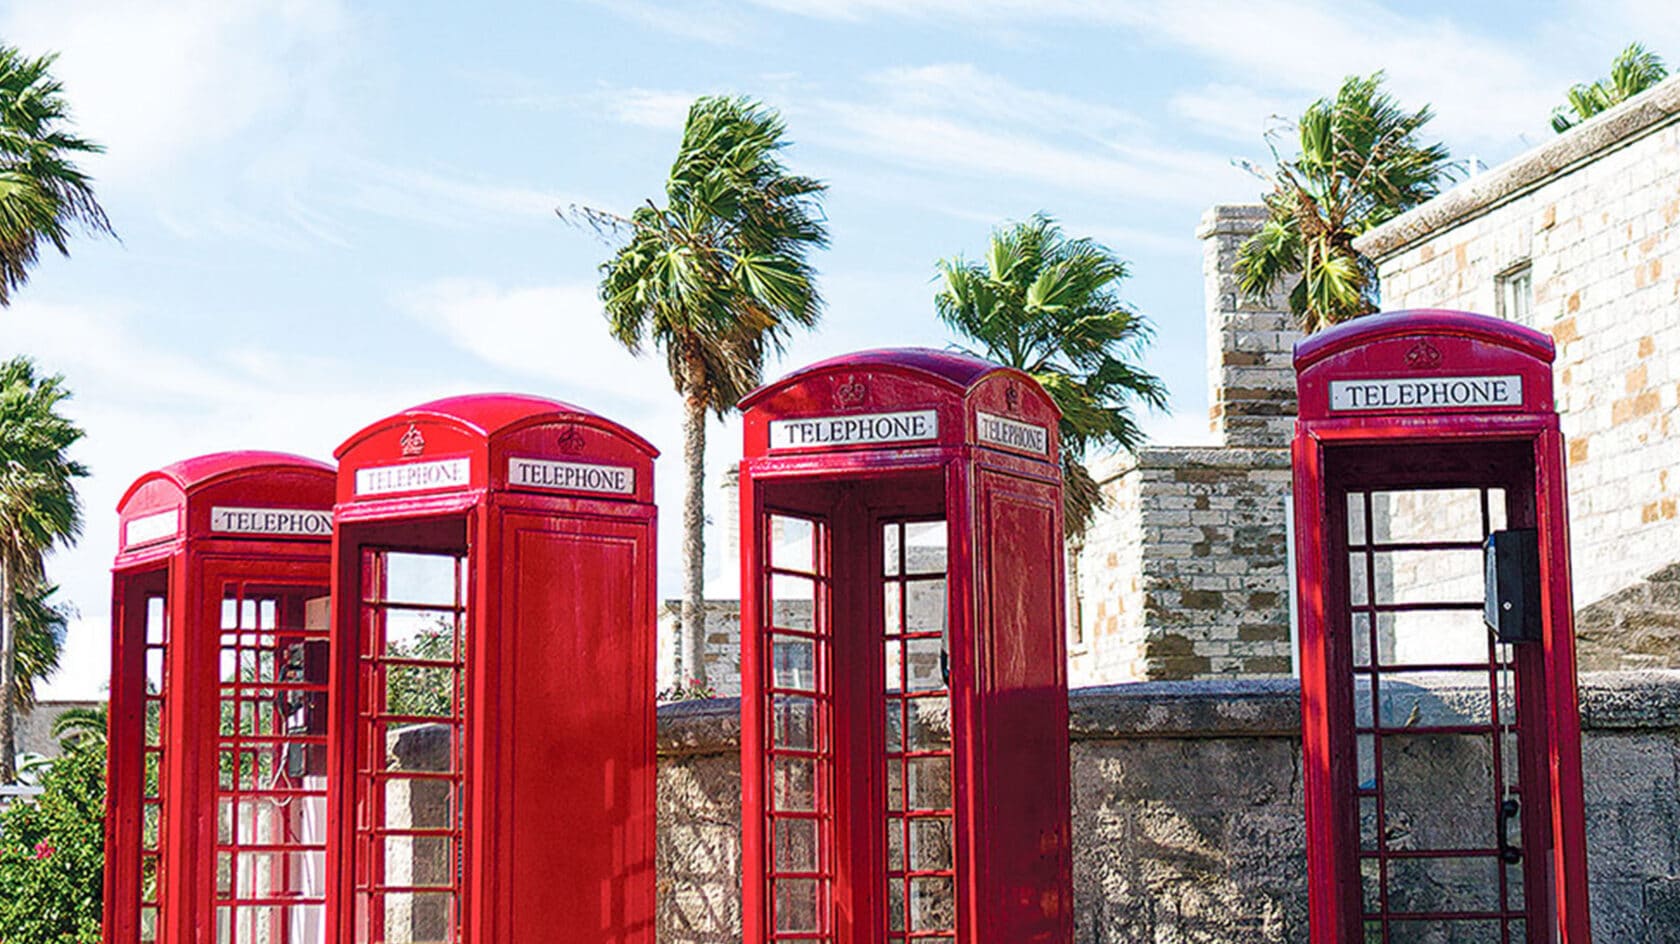 A row of red telephone booths stands in front of a stone wall.